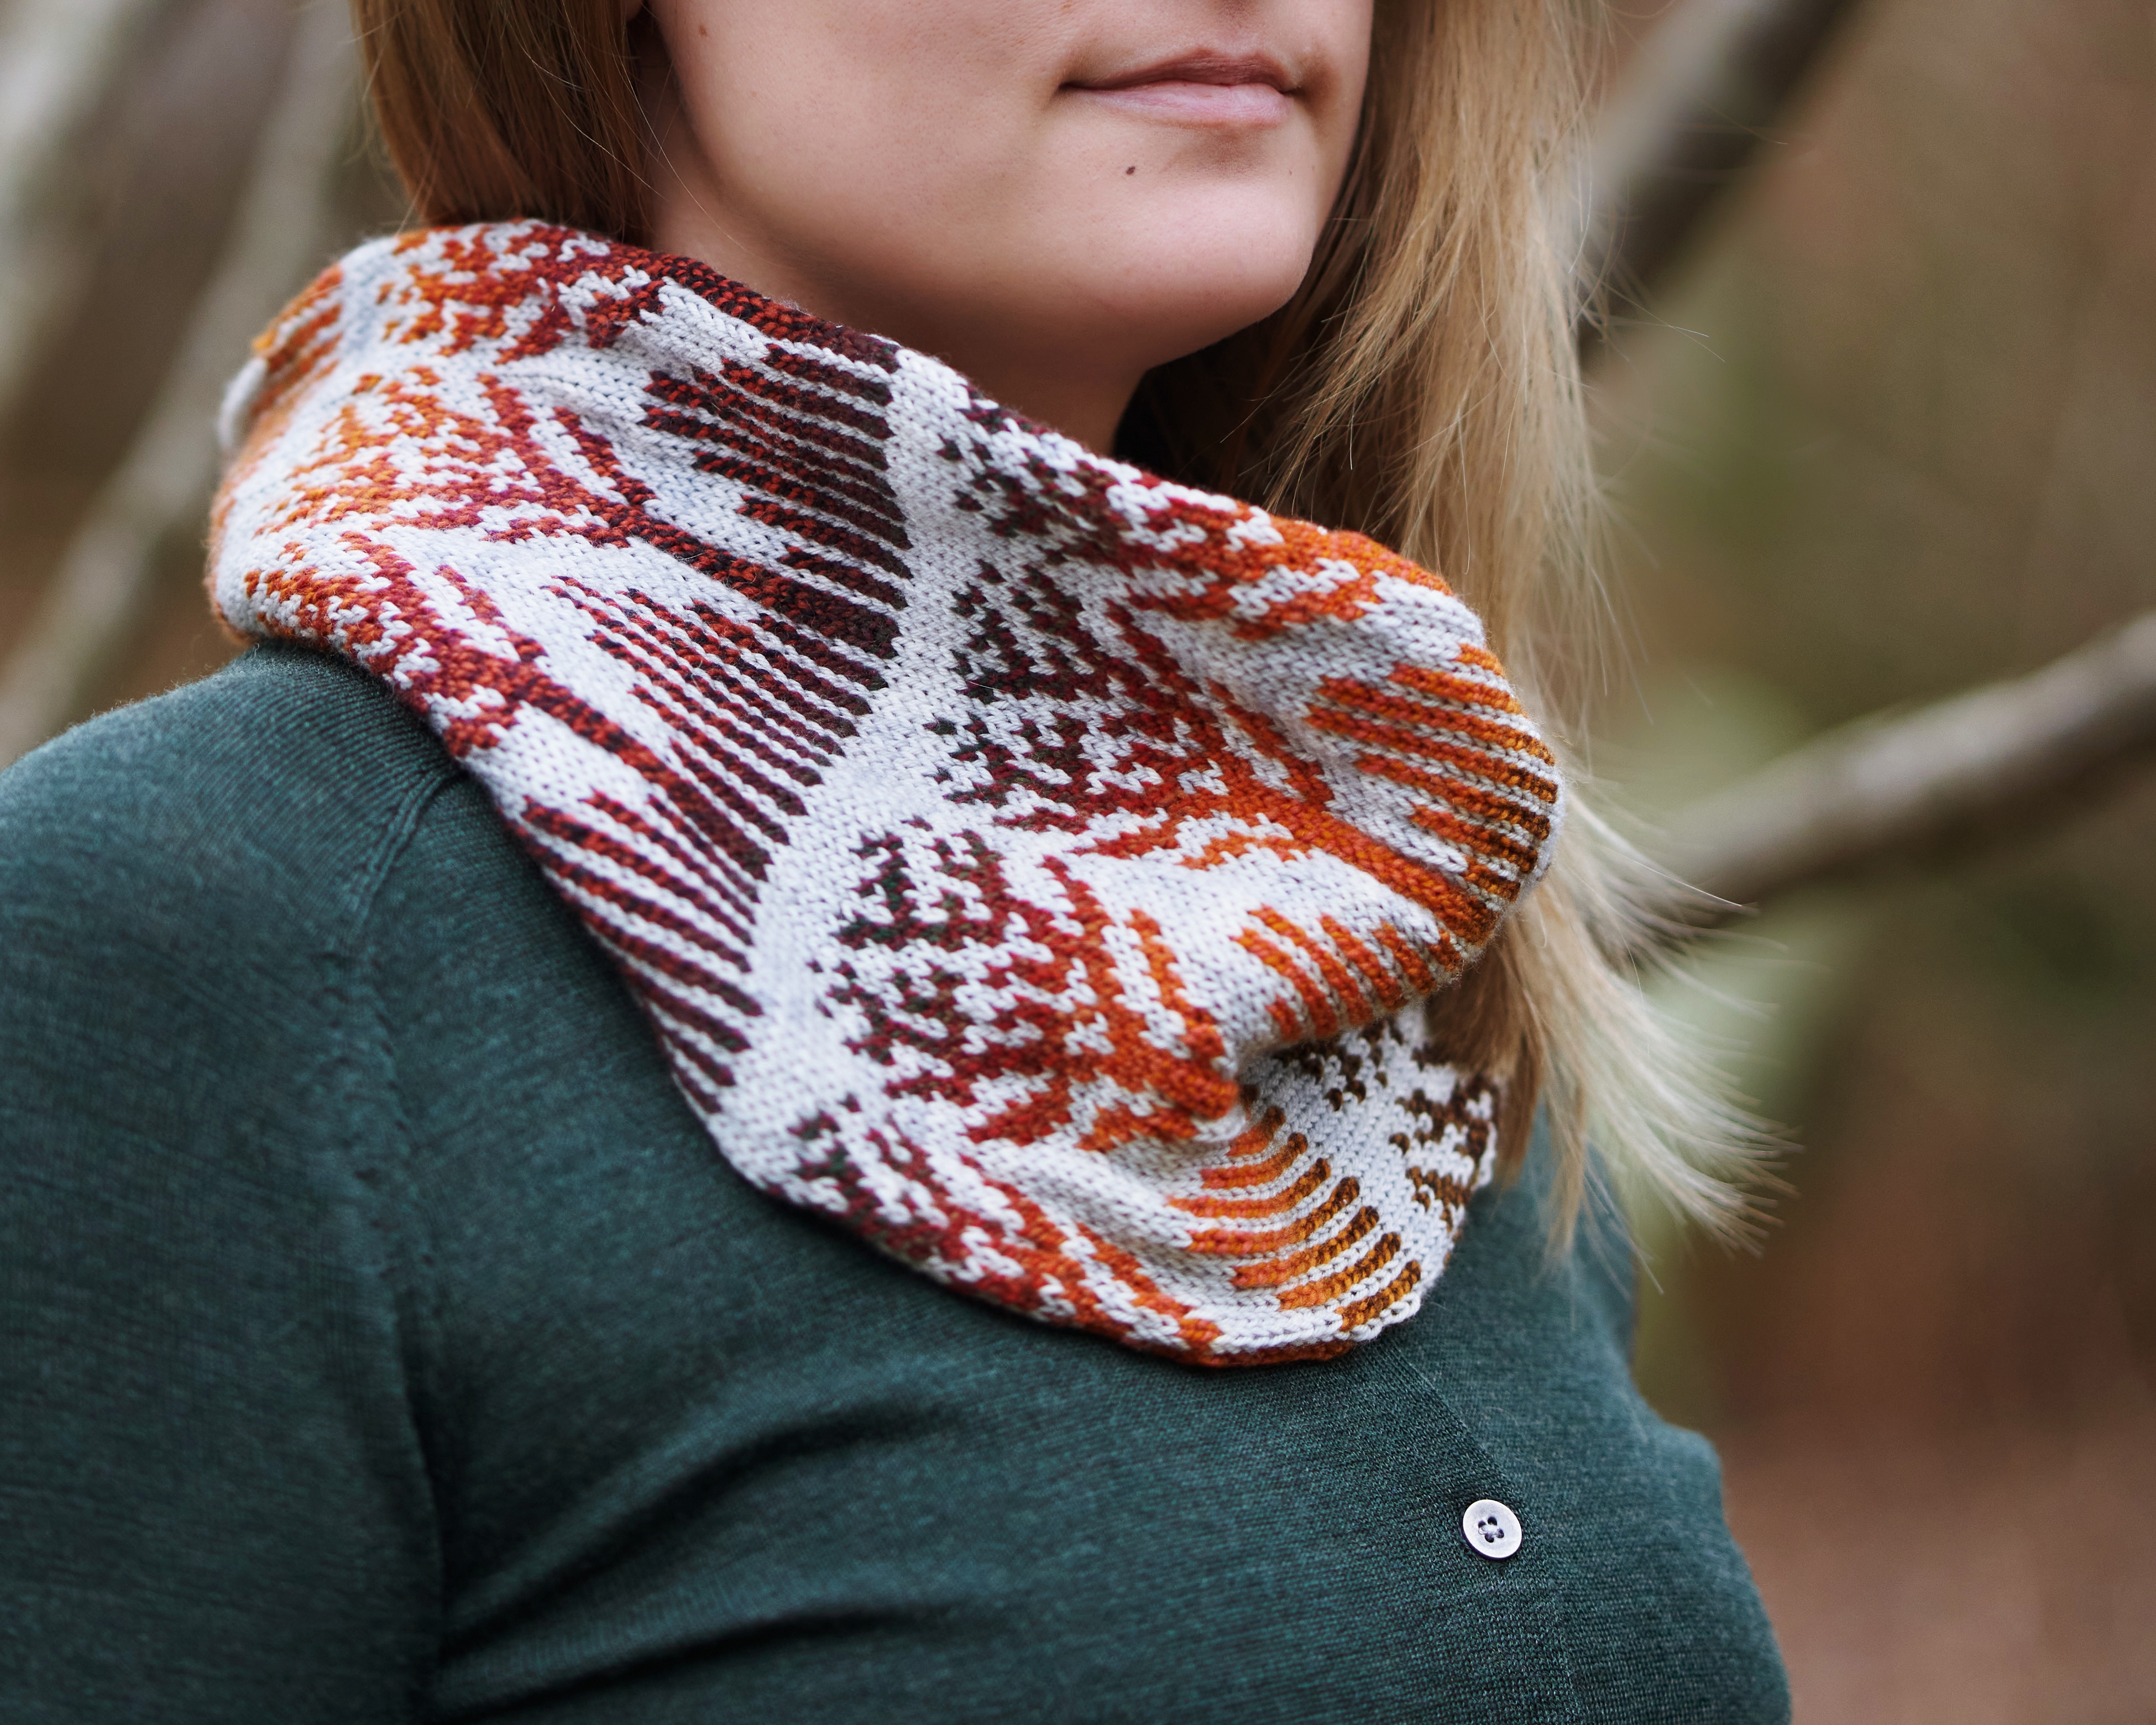 Closeup of a hank nit cowl worn on the neck of a blonde woman. The cowl features intricate colorwork in fall colors with a pale gray background.